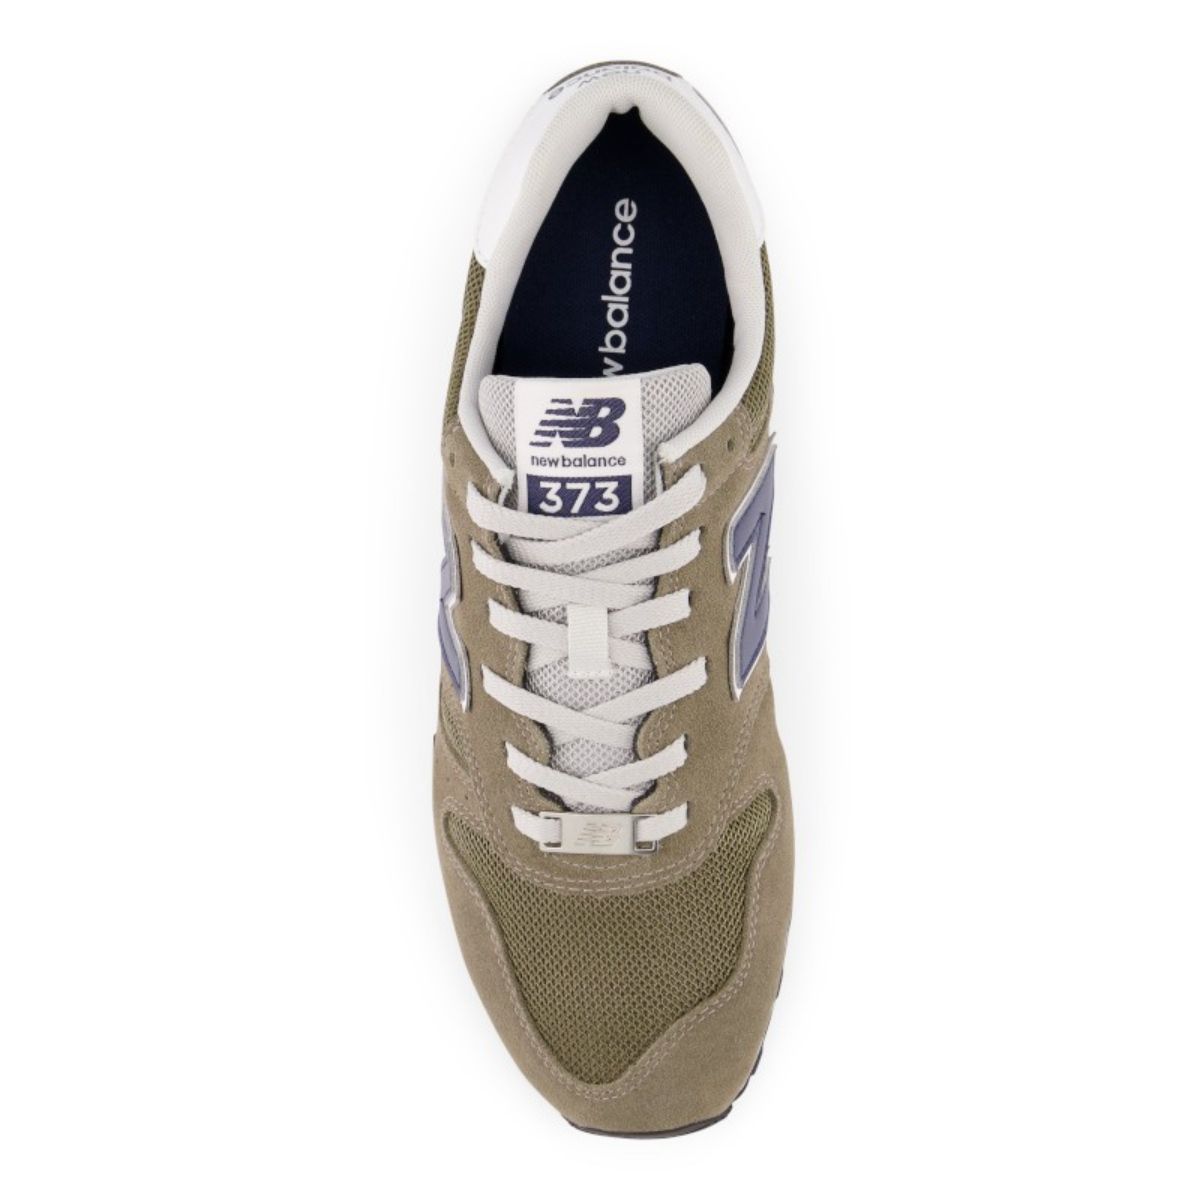 New Balance 373 - Shoes Online Sale Store For Mens,Womens - Leeds Developers